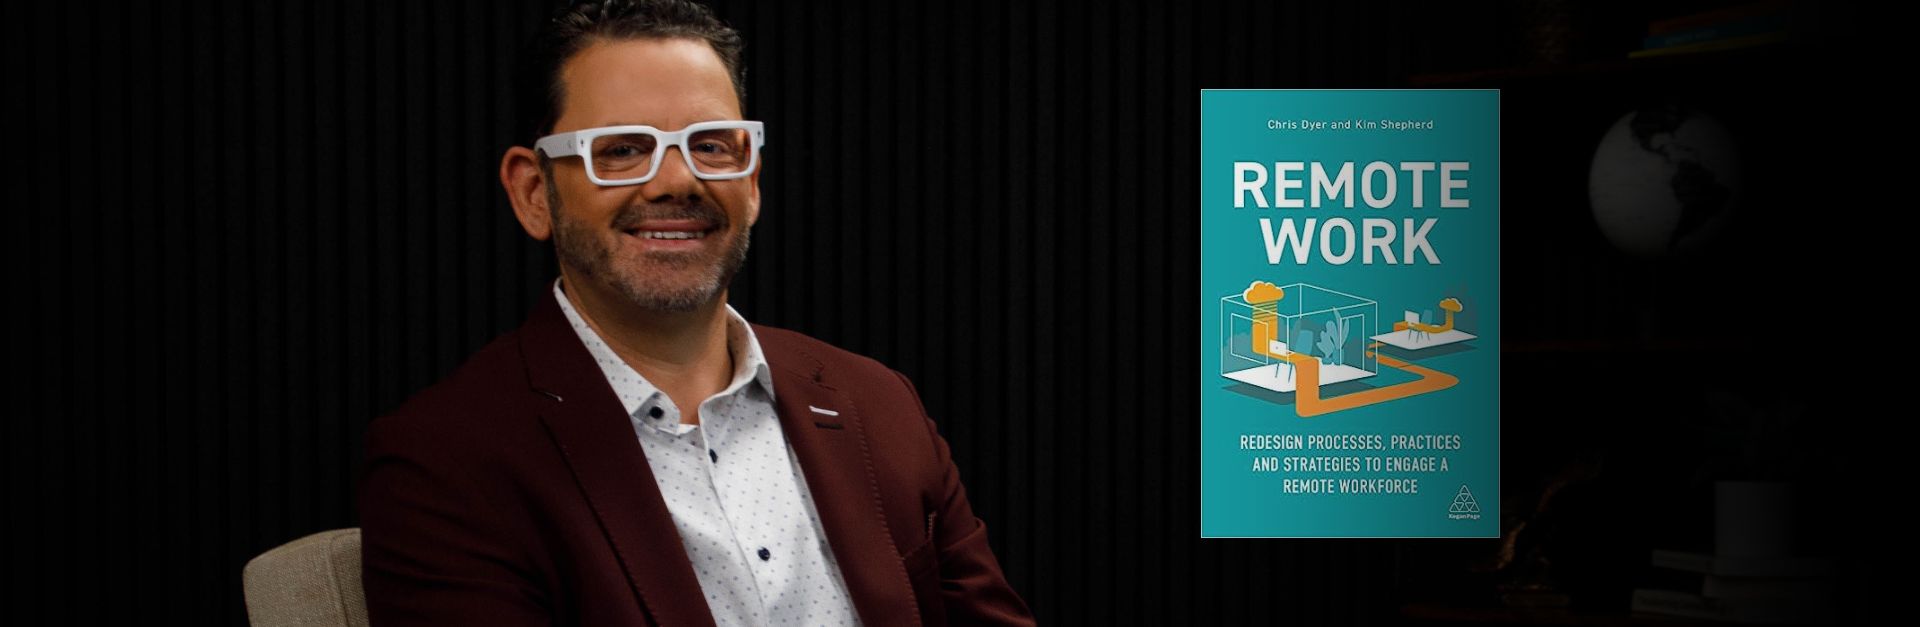 [Press Release] Author Chris Dyer’s Remote Work Books Sell Out At SHRM